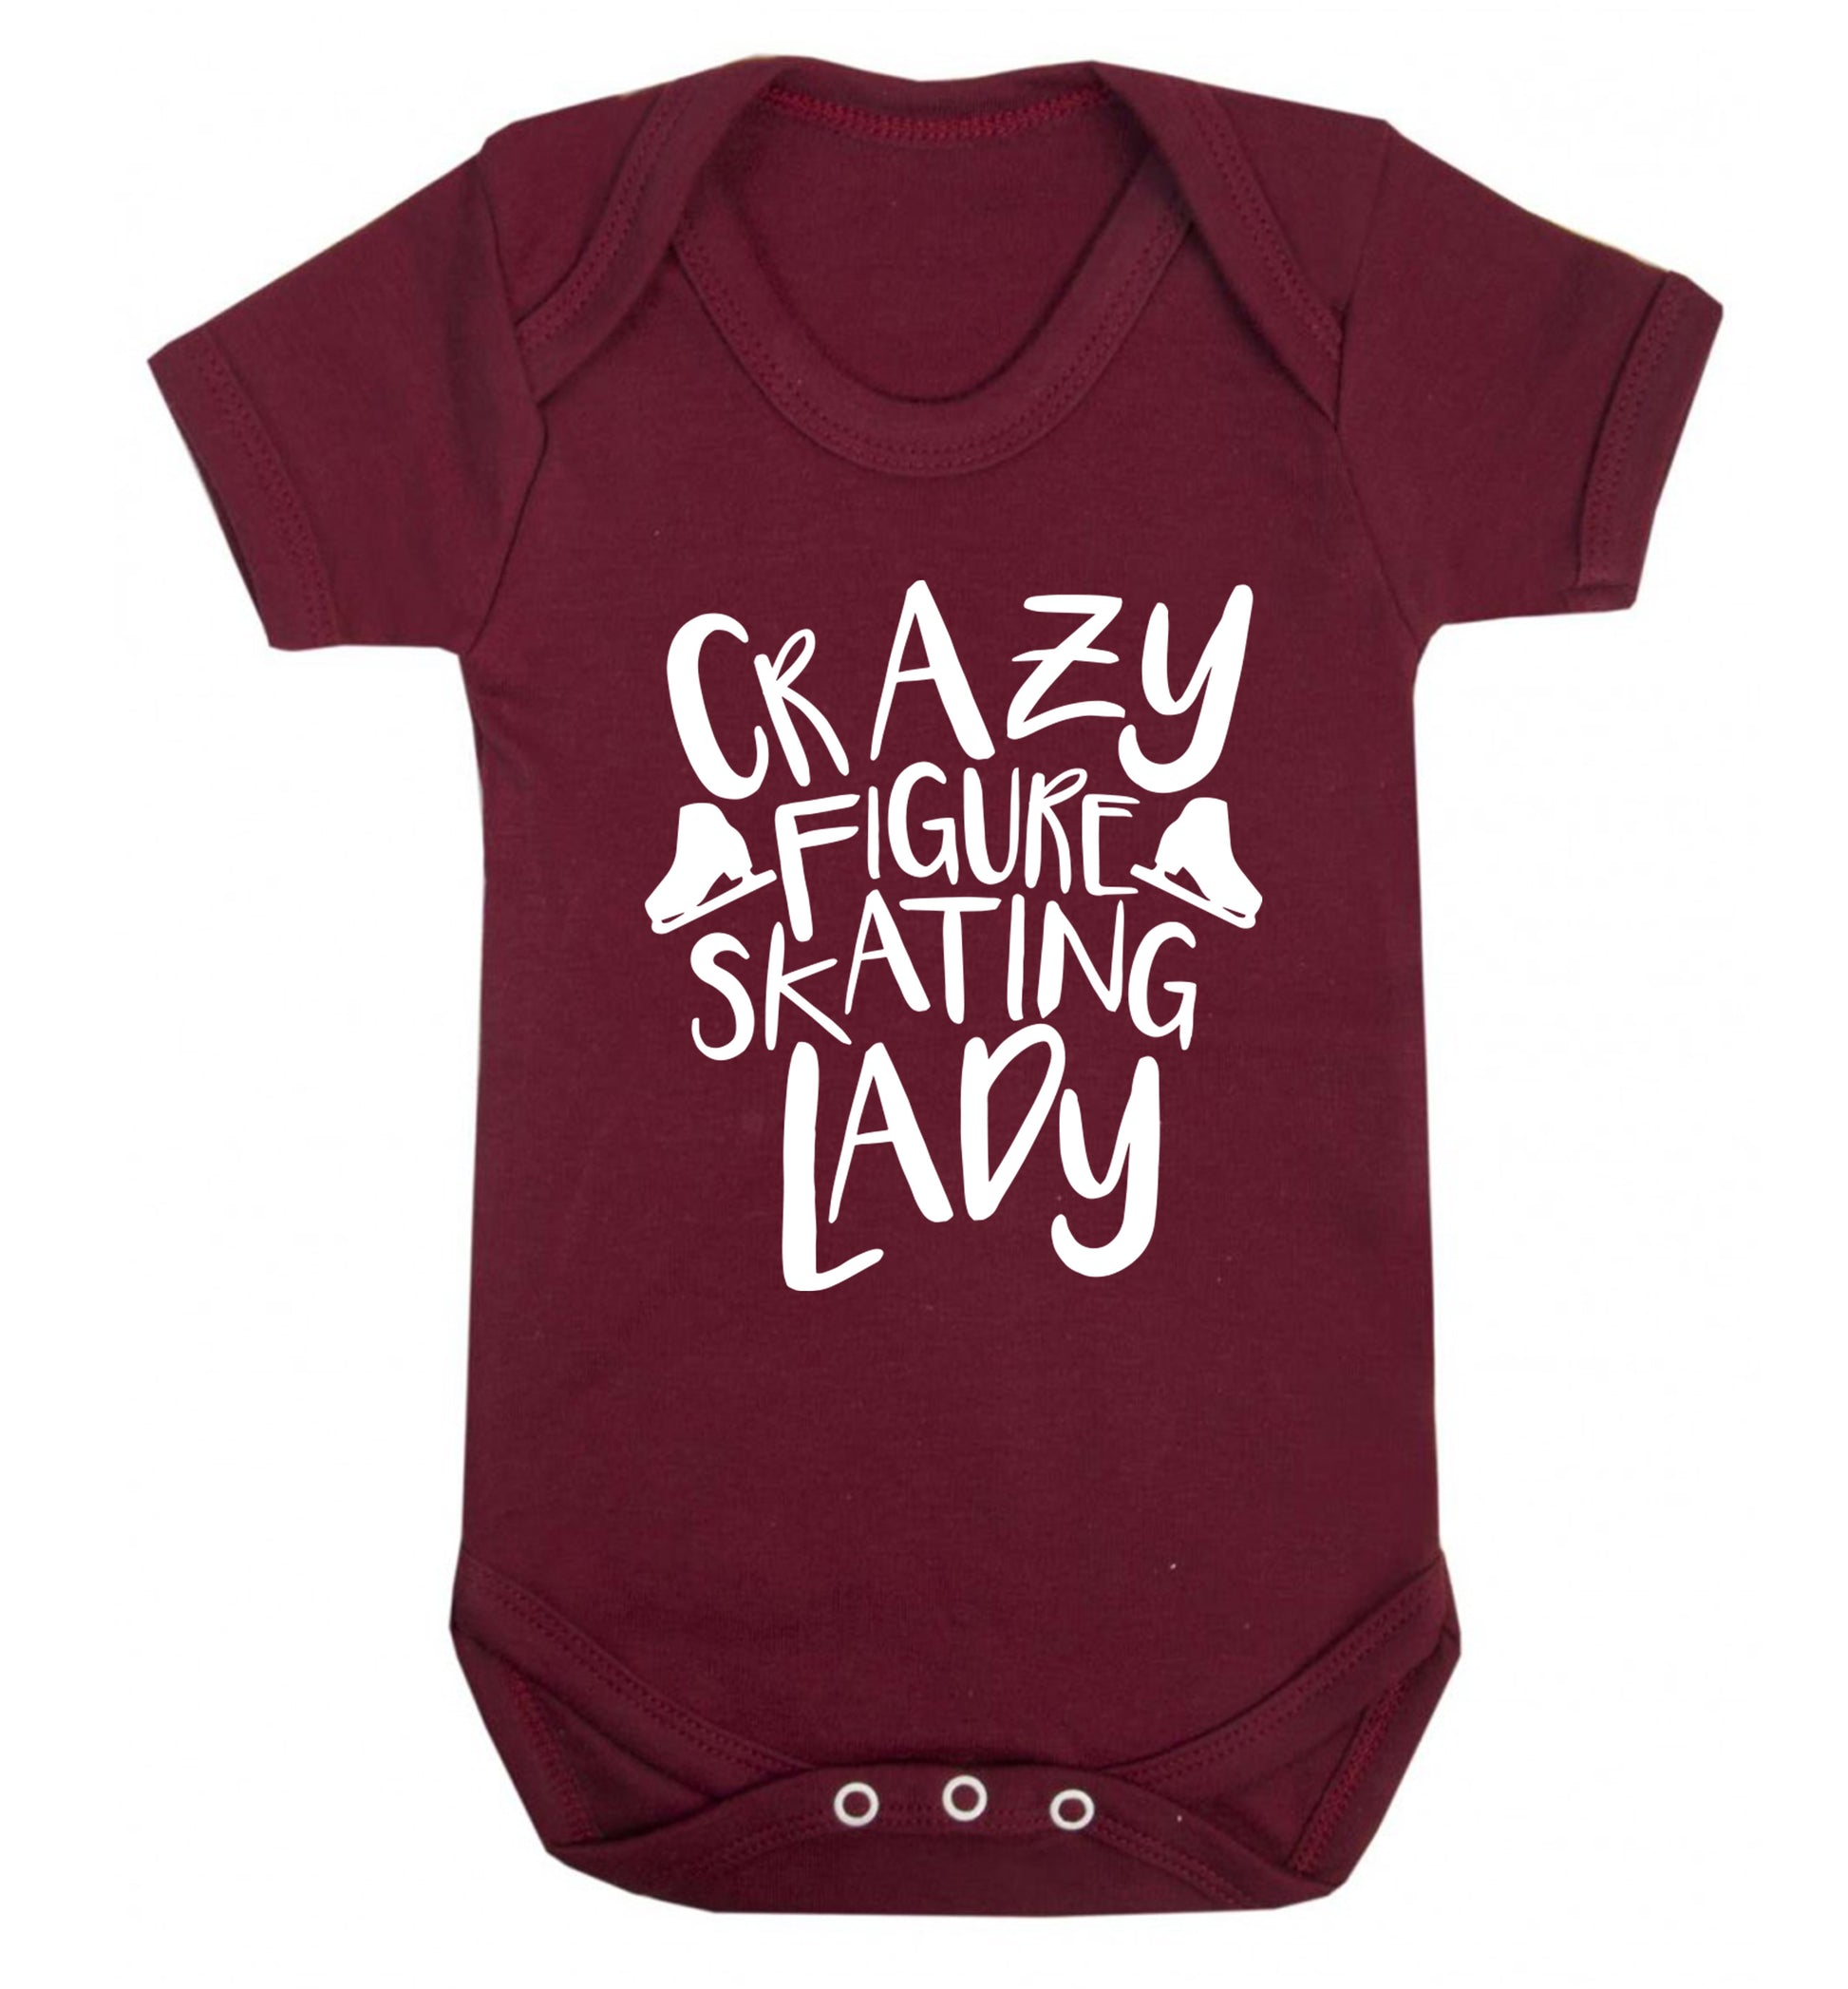 Crazy figure skating lady Baby Vest maroon 18-24 months